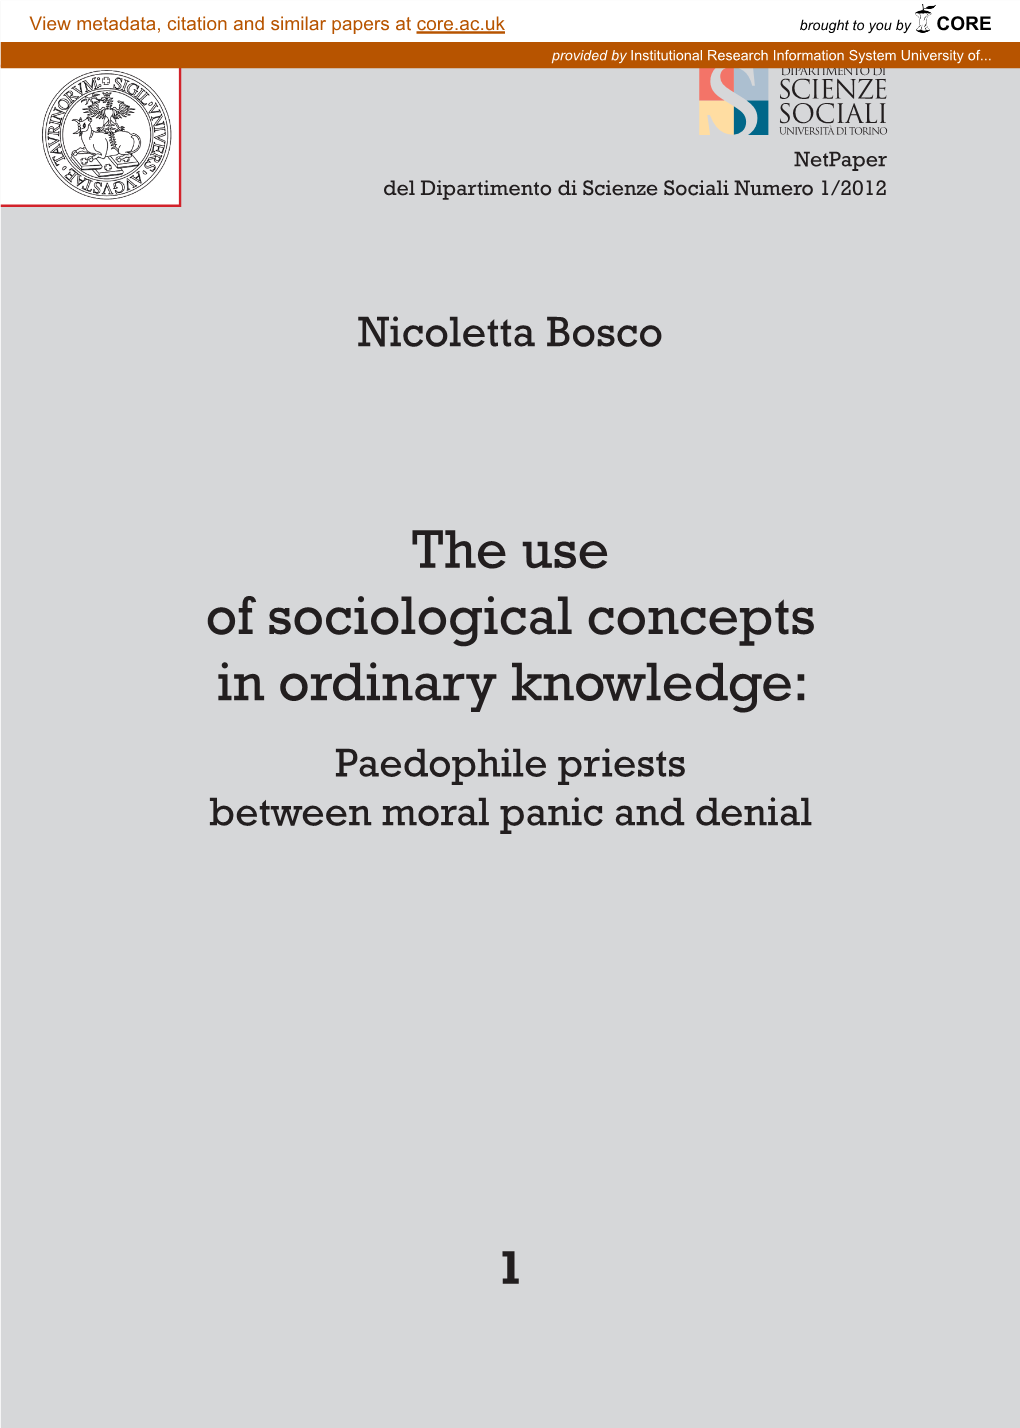 The Use of Sociological Concepts in Ordinary Knowledge: Paedophile Priests Between Moral Panic and Denial